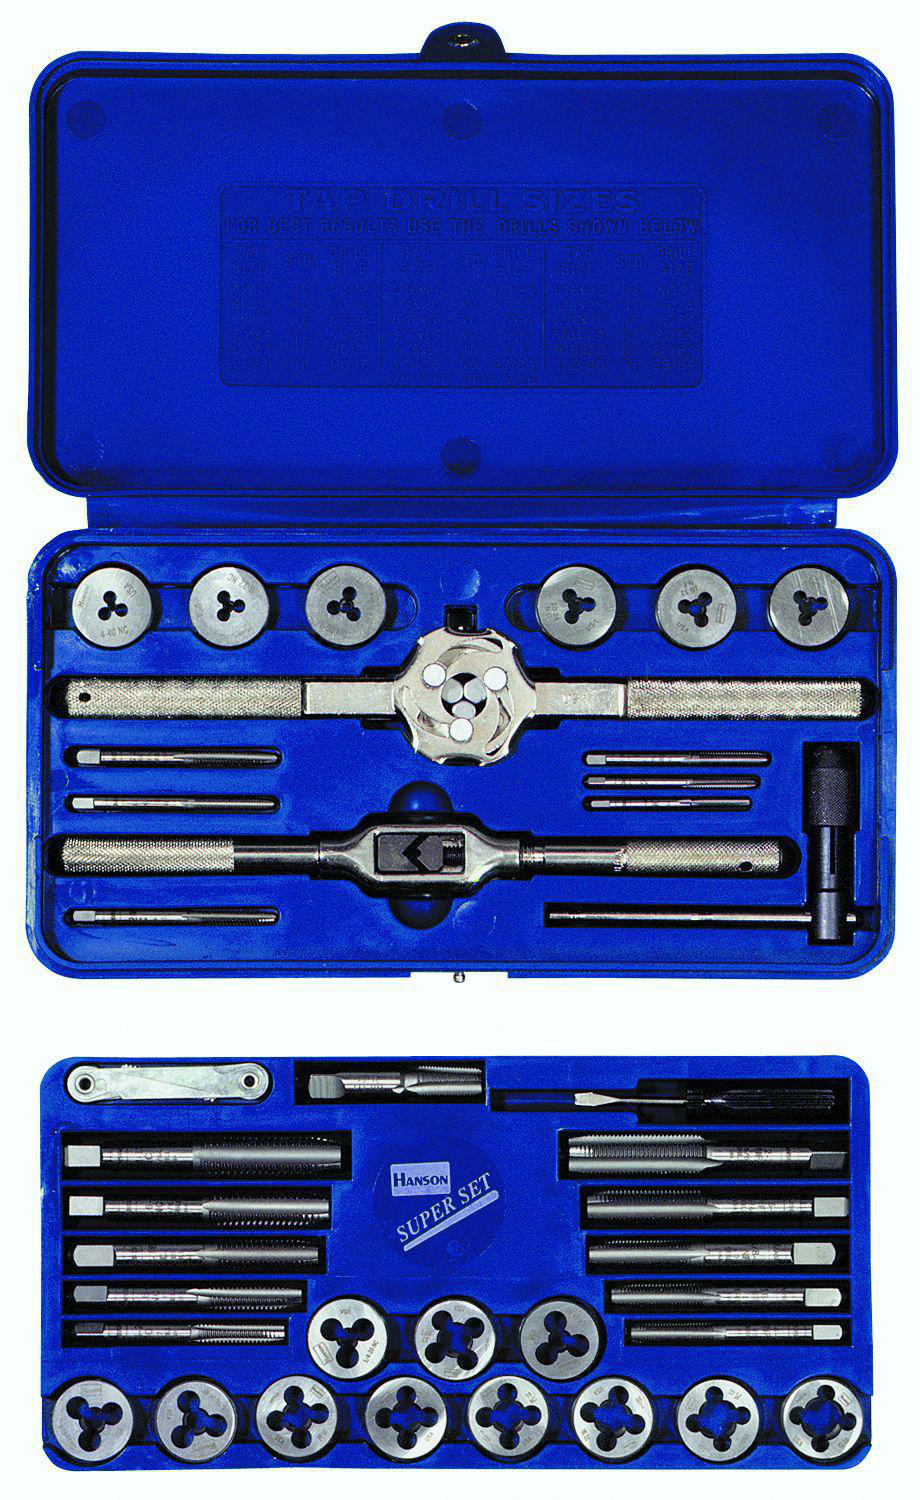 VCT Pipe Tap & Die Set 6 Pc To Cleans Cuts or Renews Threads 